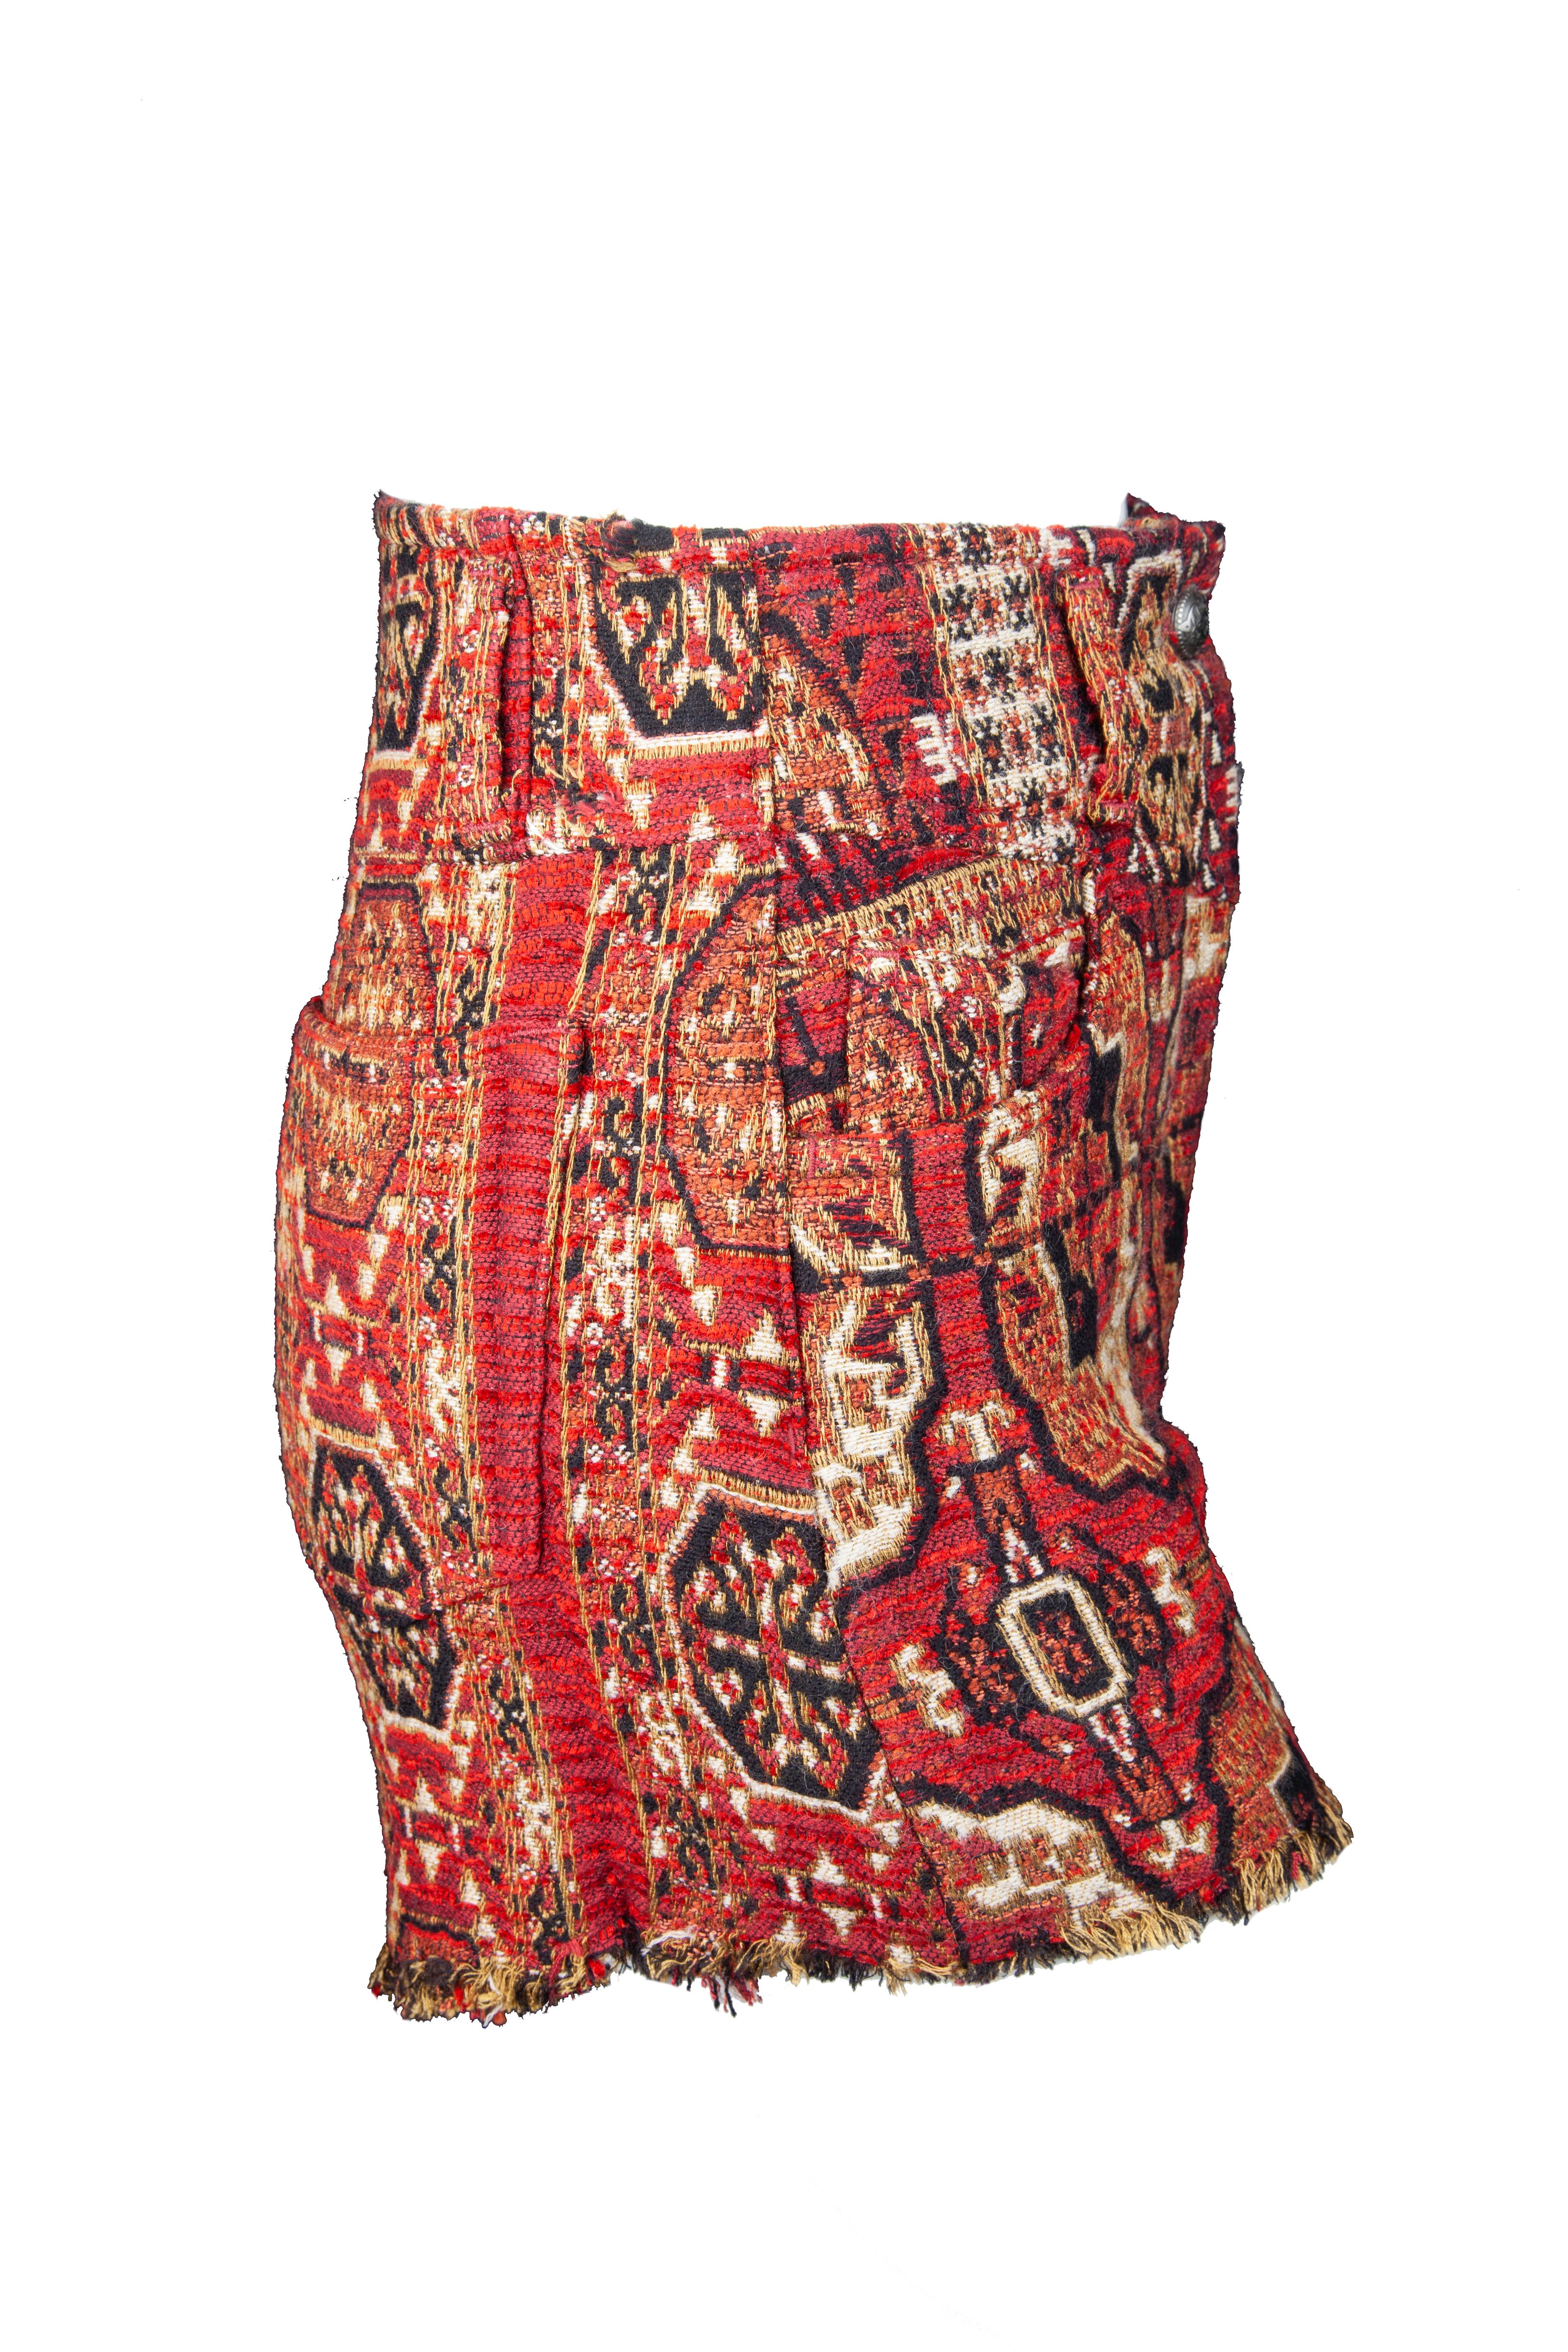 The Etro Fall 2019 Runway red shorts feature a jacquard tile print, a zipper/button closure, pockets, and a lightly fringed hem. Brand new with tags. Made in Italy.

Sizes Available: 27

Measurements:
Outer Length: 12 in
Total Length: 16 in
Waist: